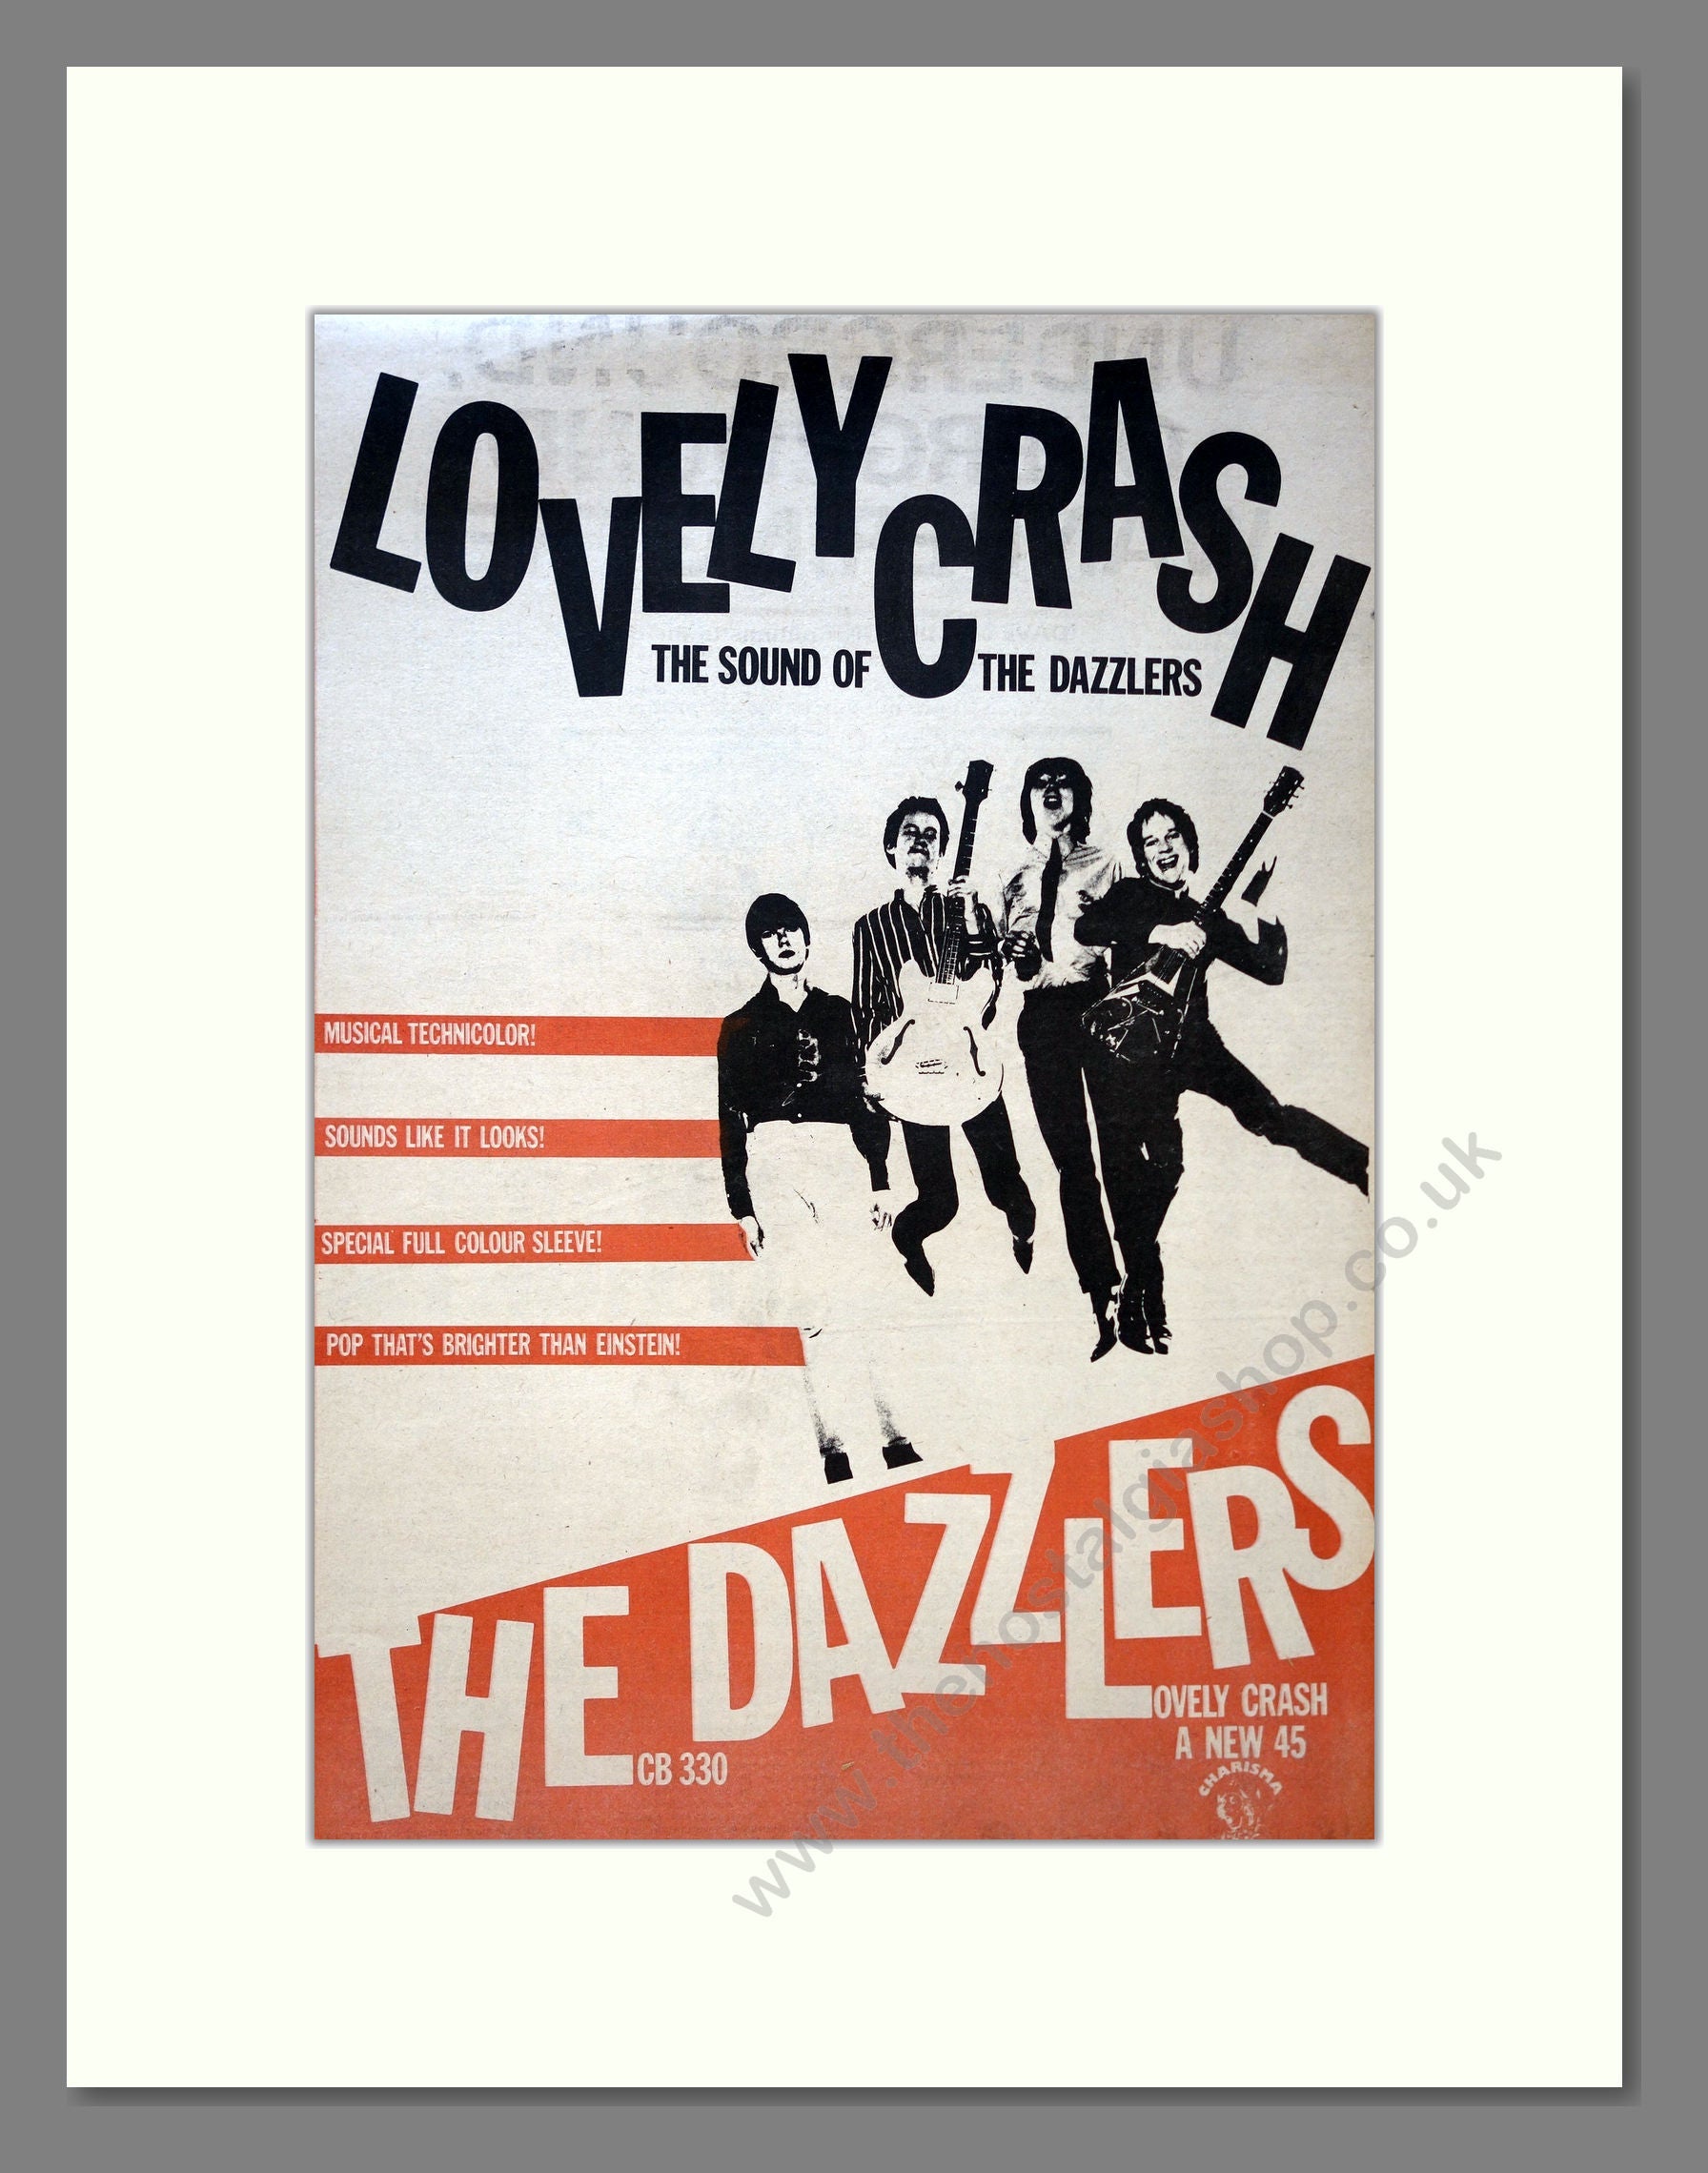 Dazzlers (The) - Lovely Crash. Vintage Advert 1979 (ref AD18115)